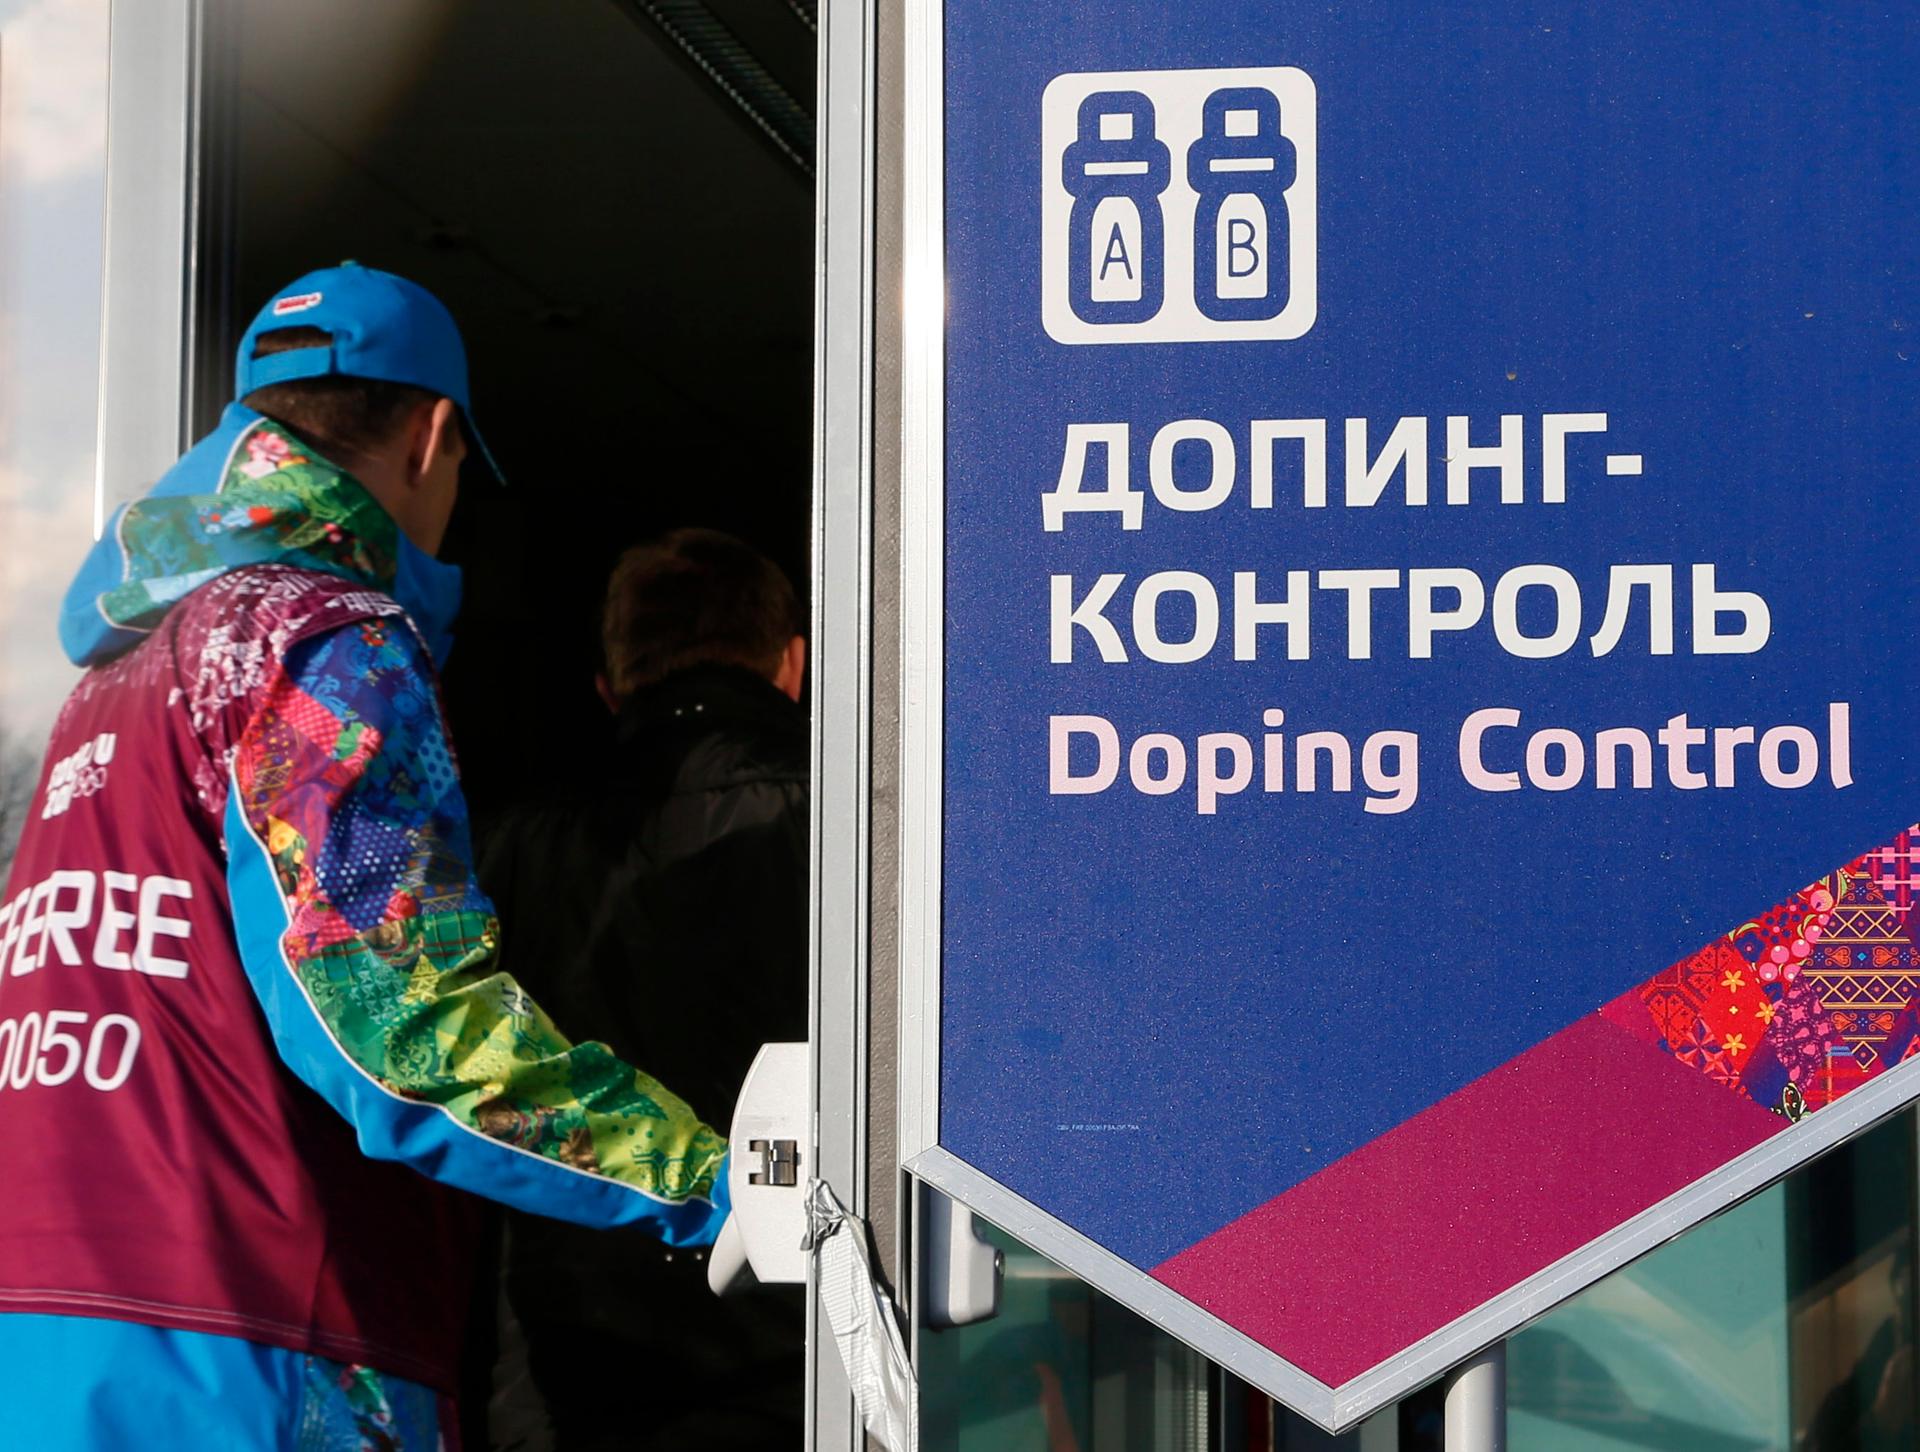 Russian doping control center